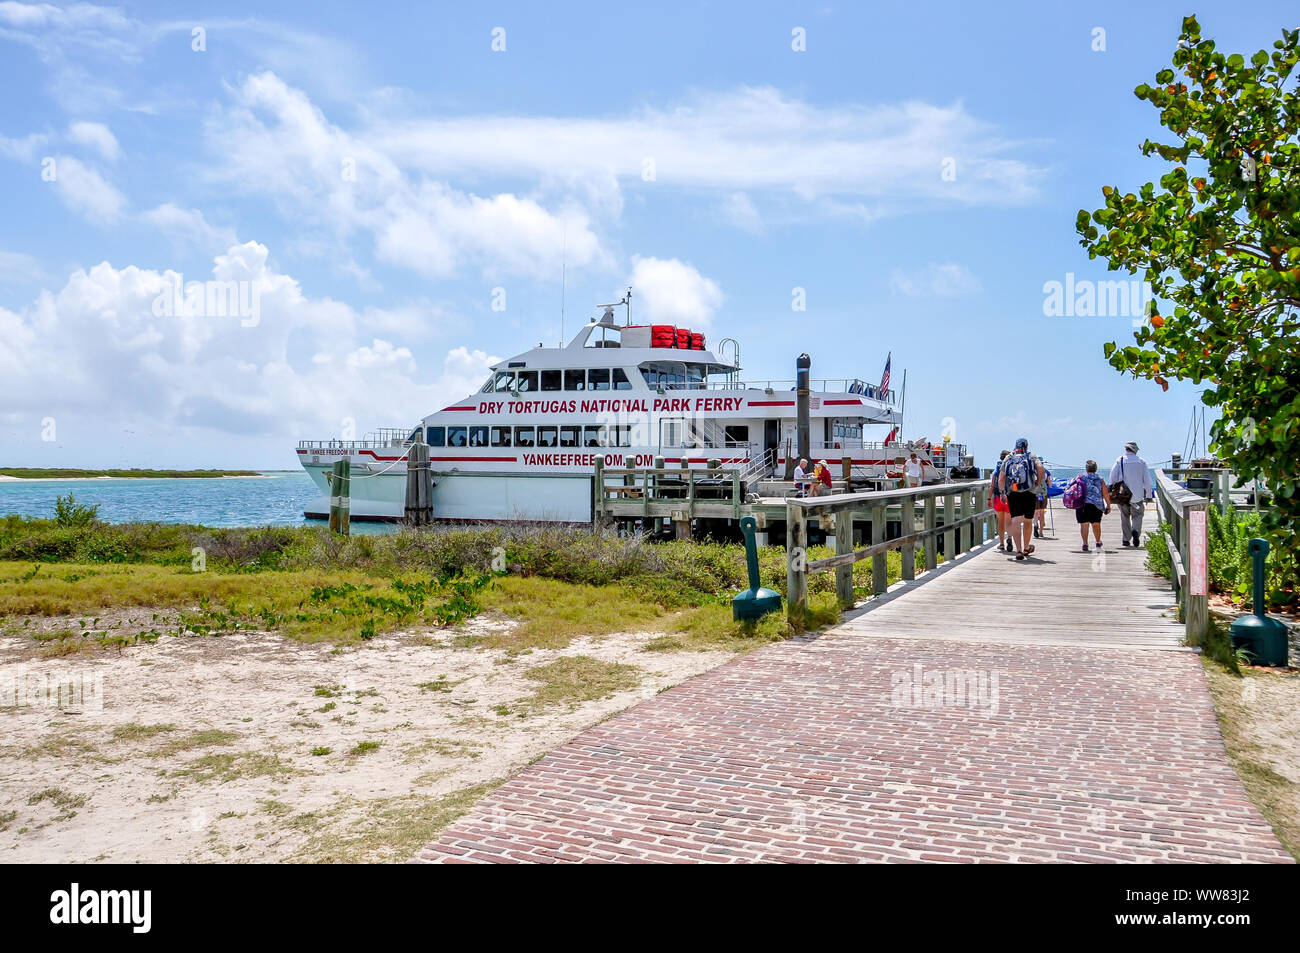 Ferry boat serving Dry Tortugas National Park from Key West, Florida. People board the ferry near Fort Jefferson after a day trip to the island. Stock Photo